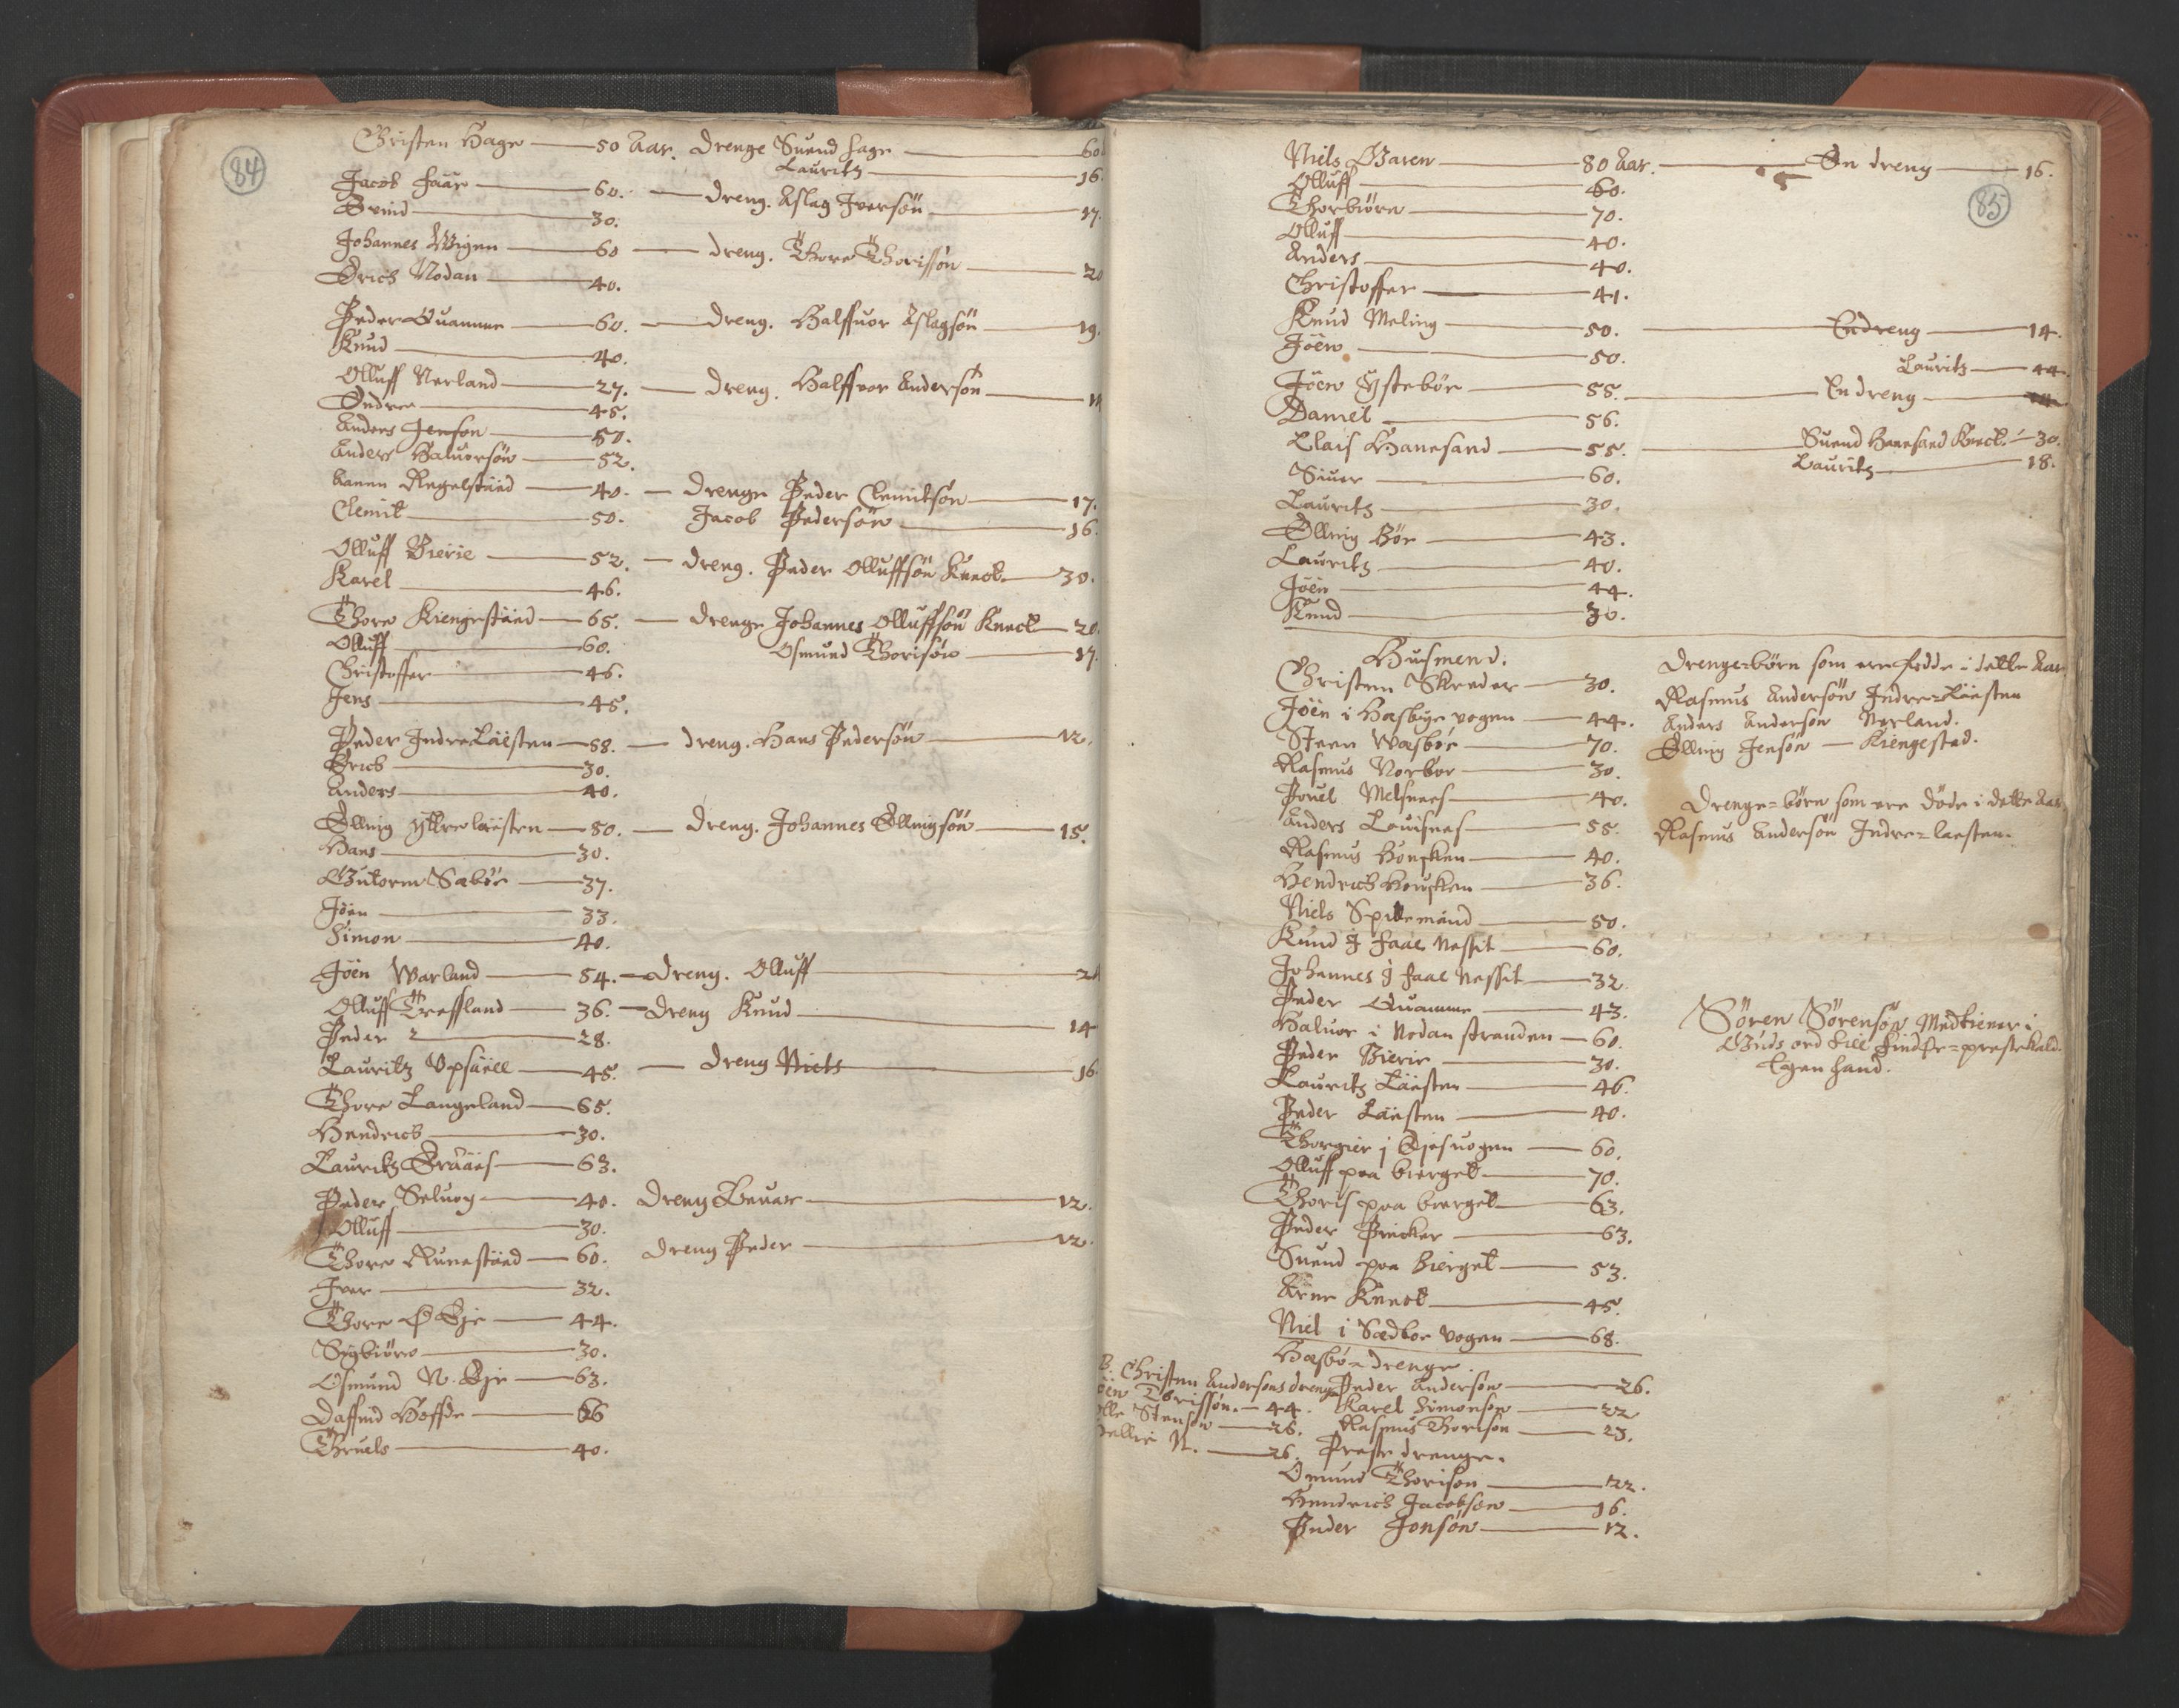 RA, Vicar's Census 1664-1666, no. 18: Stavanger deanery and Karmsund deanery, 1664-1666, p. 84-85